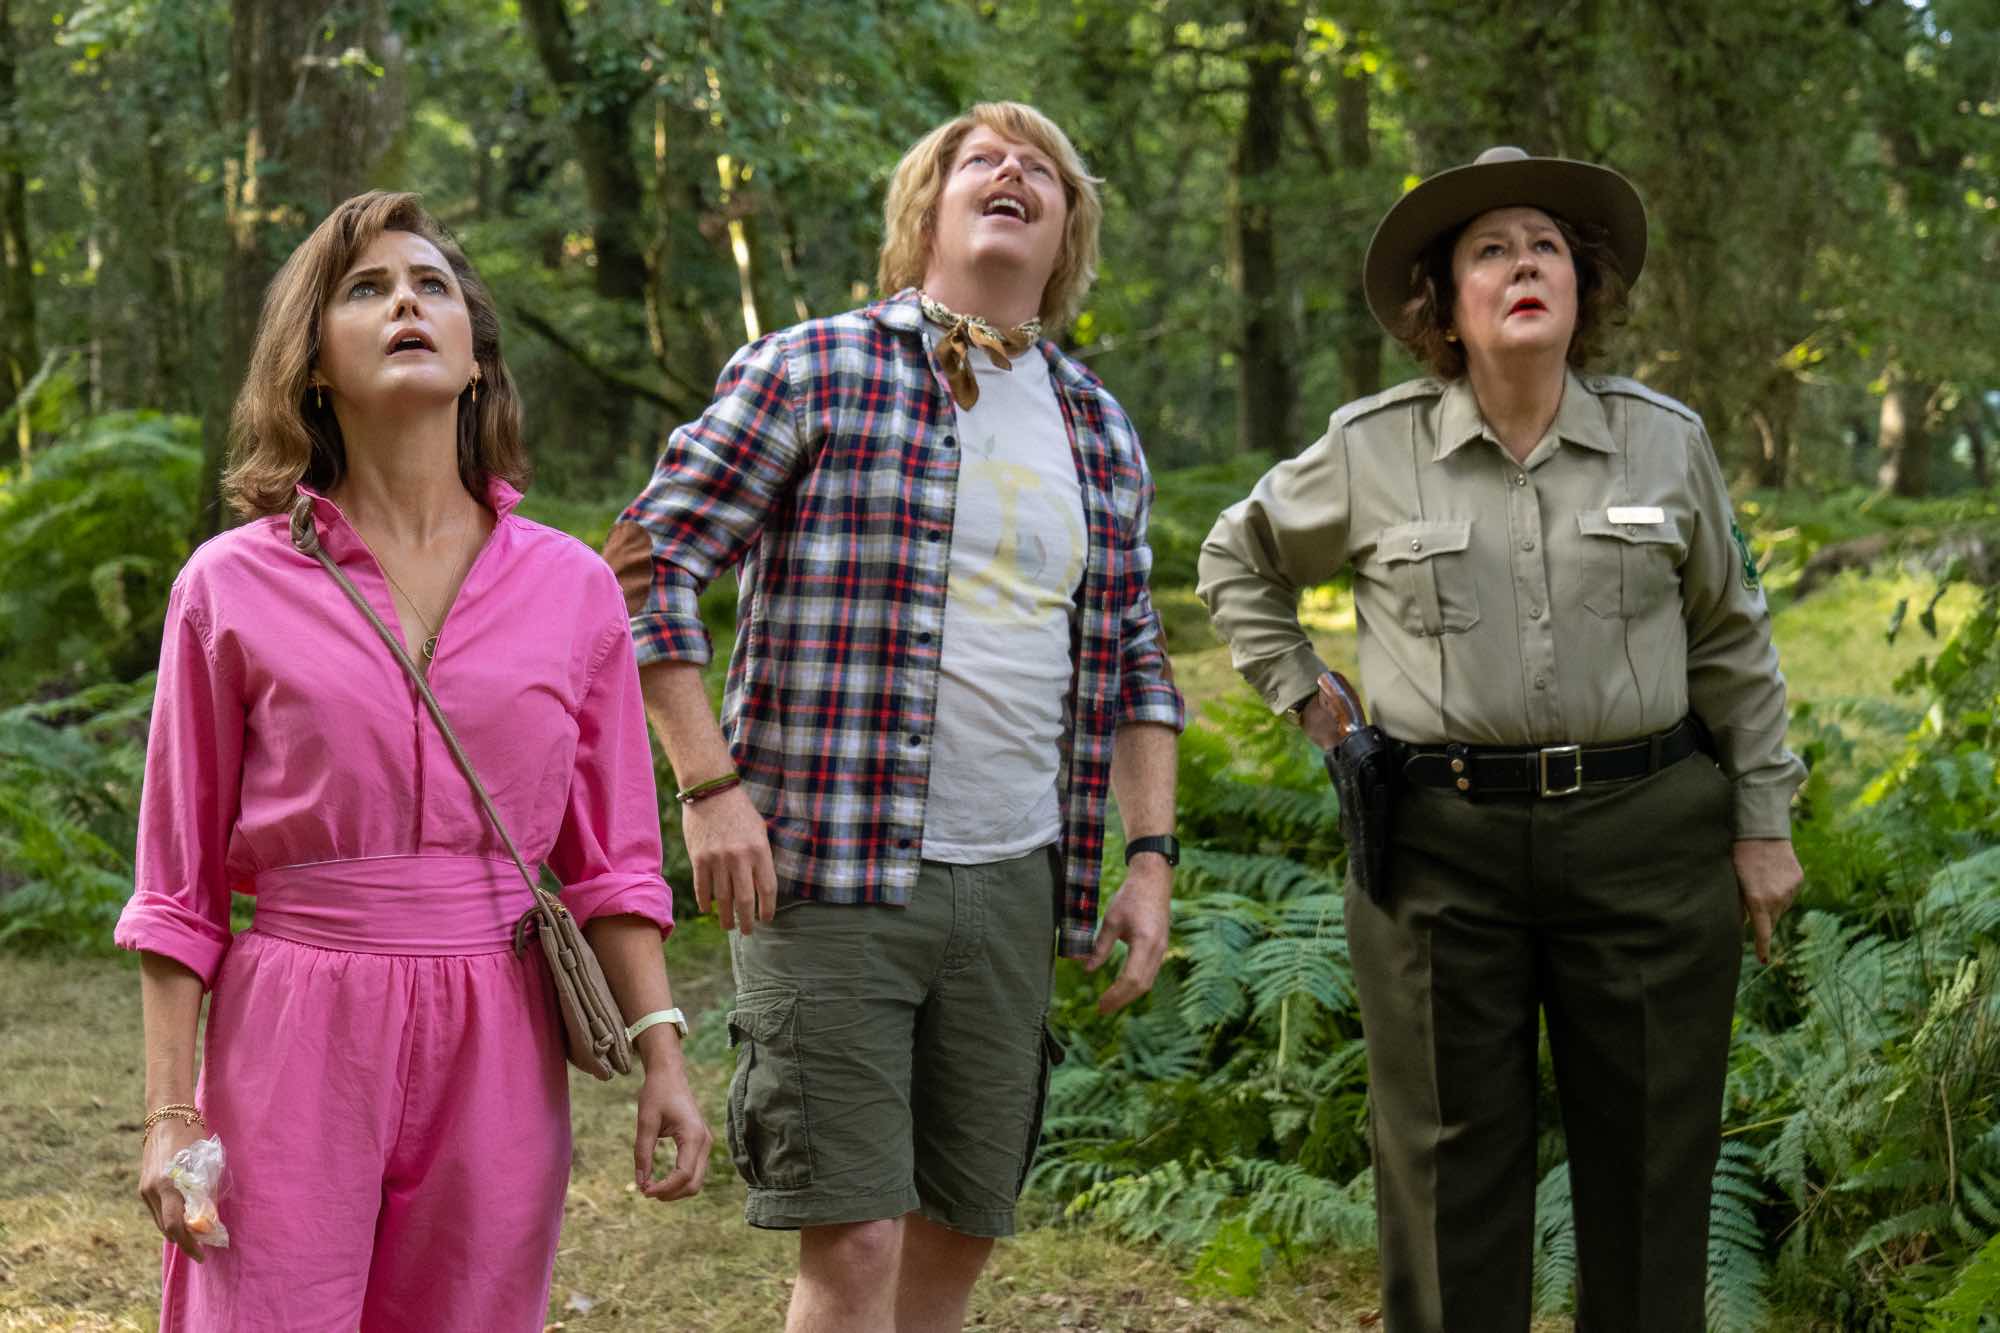 'Cocaine Bear' Keri Russell as Sari, Jesse Tyler Ferguson as Peter, and Margo Martindale as Ranger Liz looking worried looking up into a tree